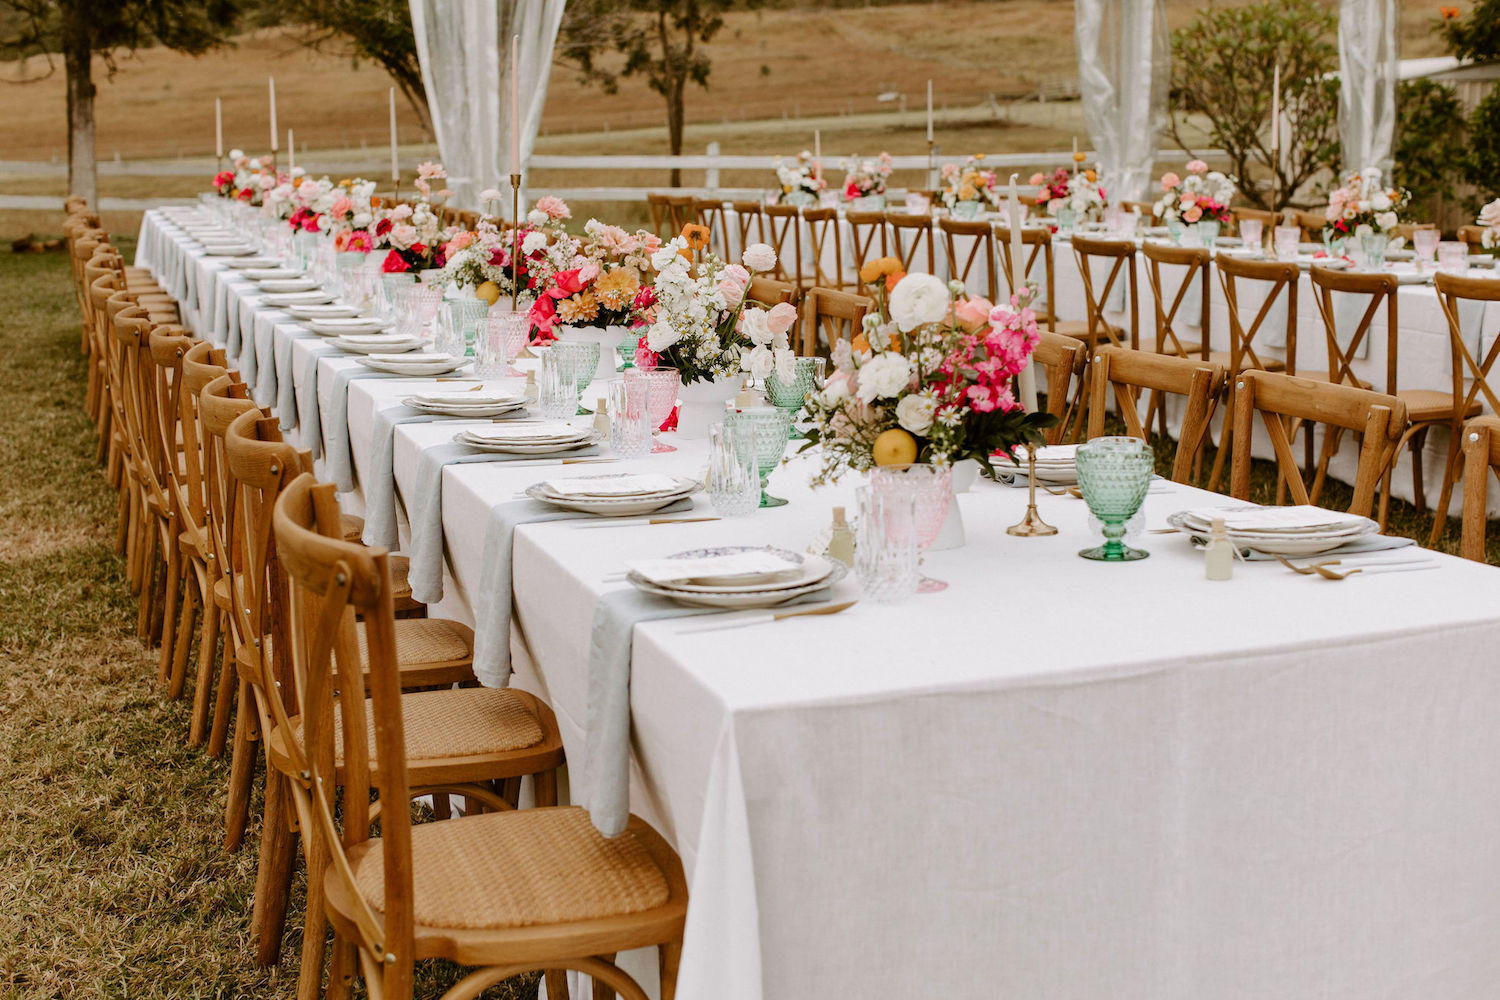 Alfresco dining under the stars for this garden party wedding